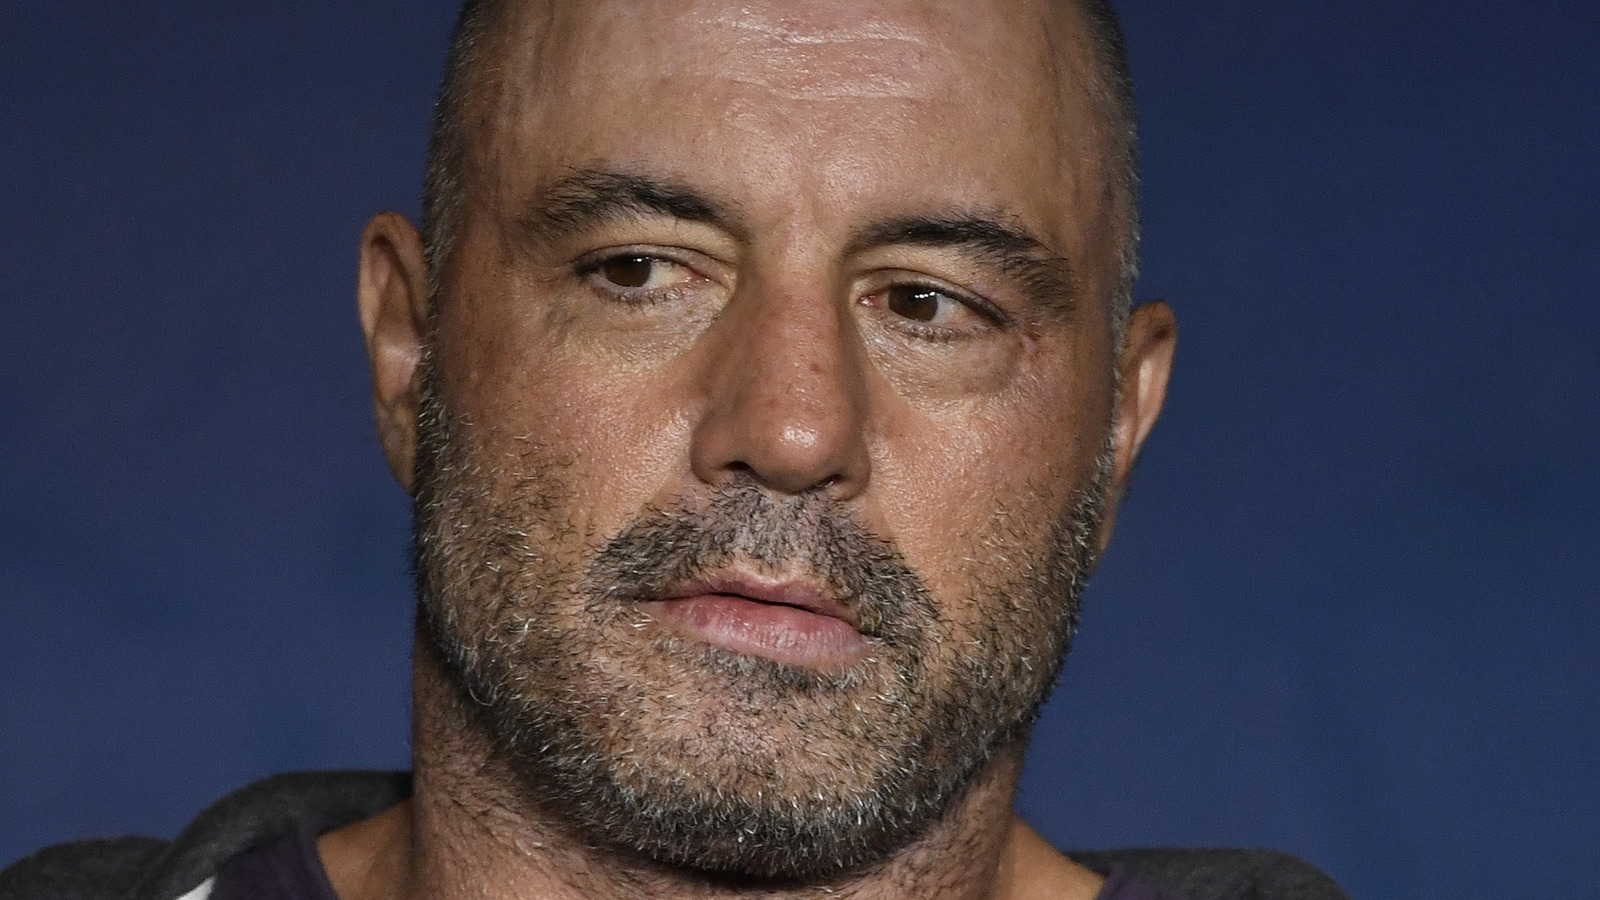 Joe Rogan’s Controversial Comment On Unhoused People Is Met With Fury